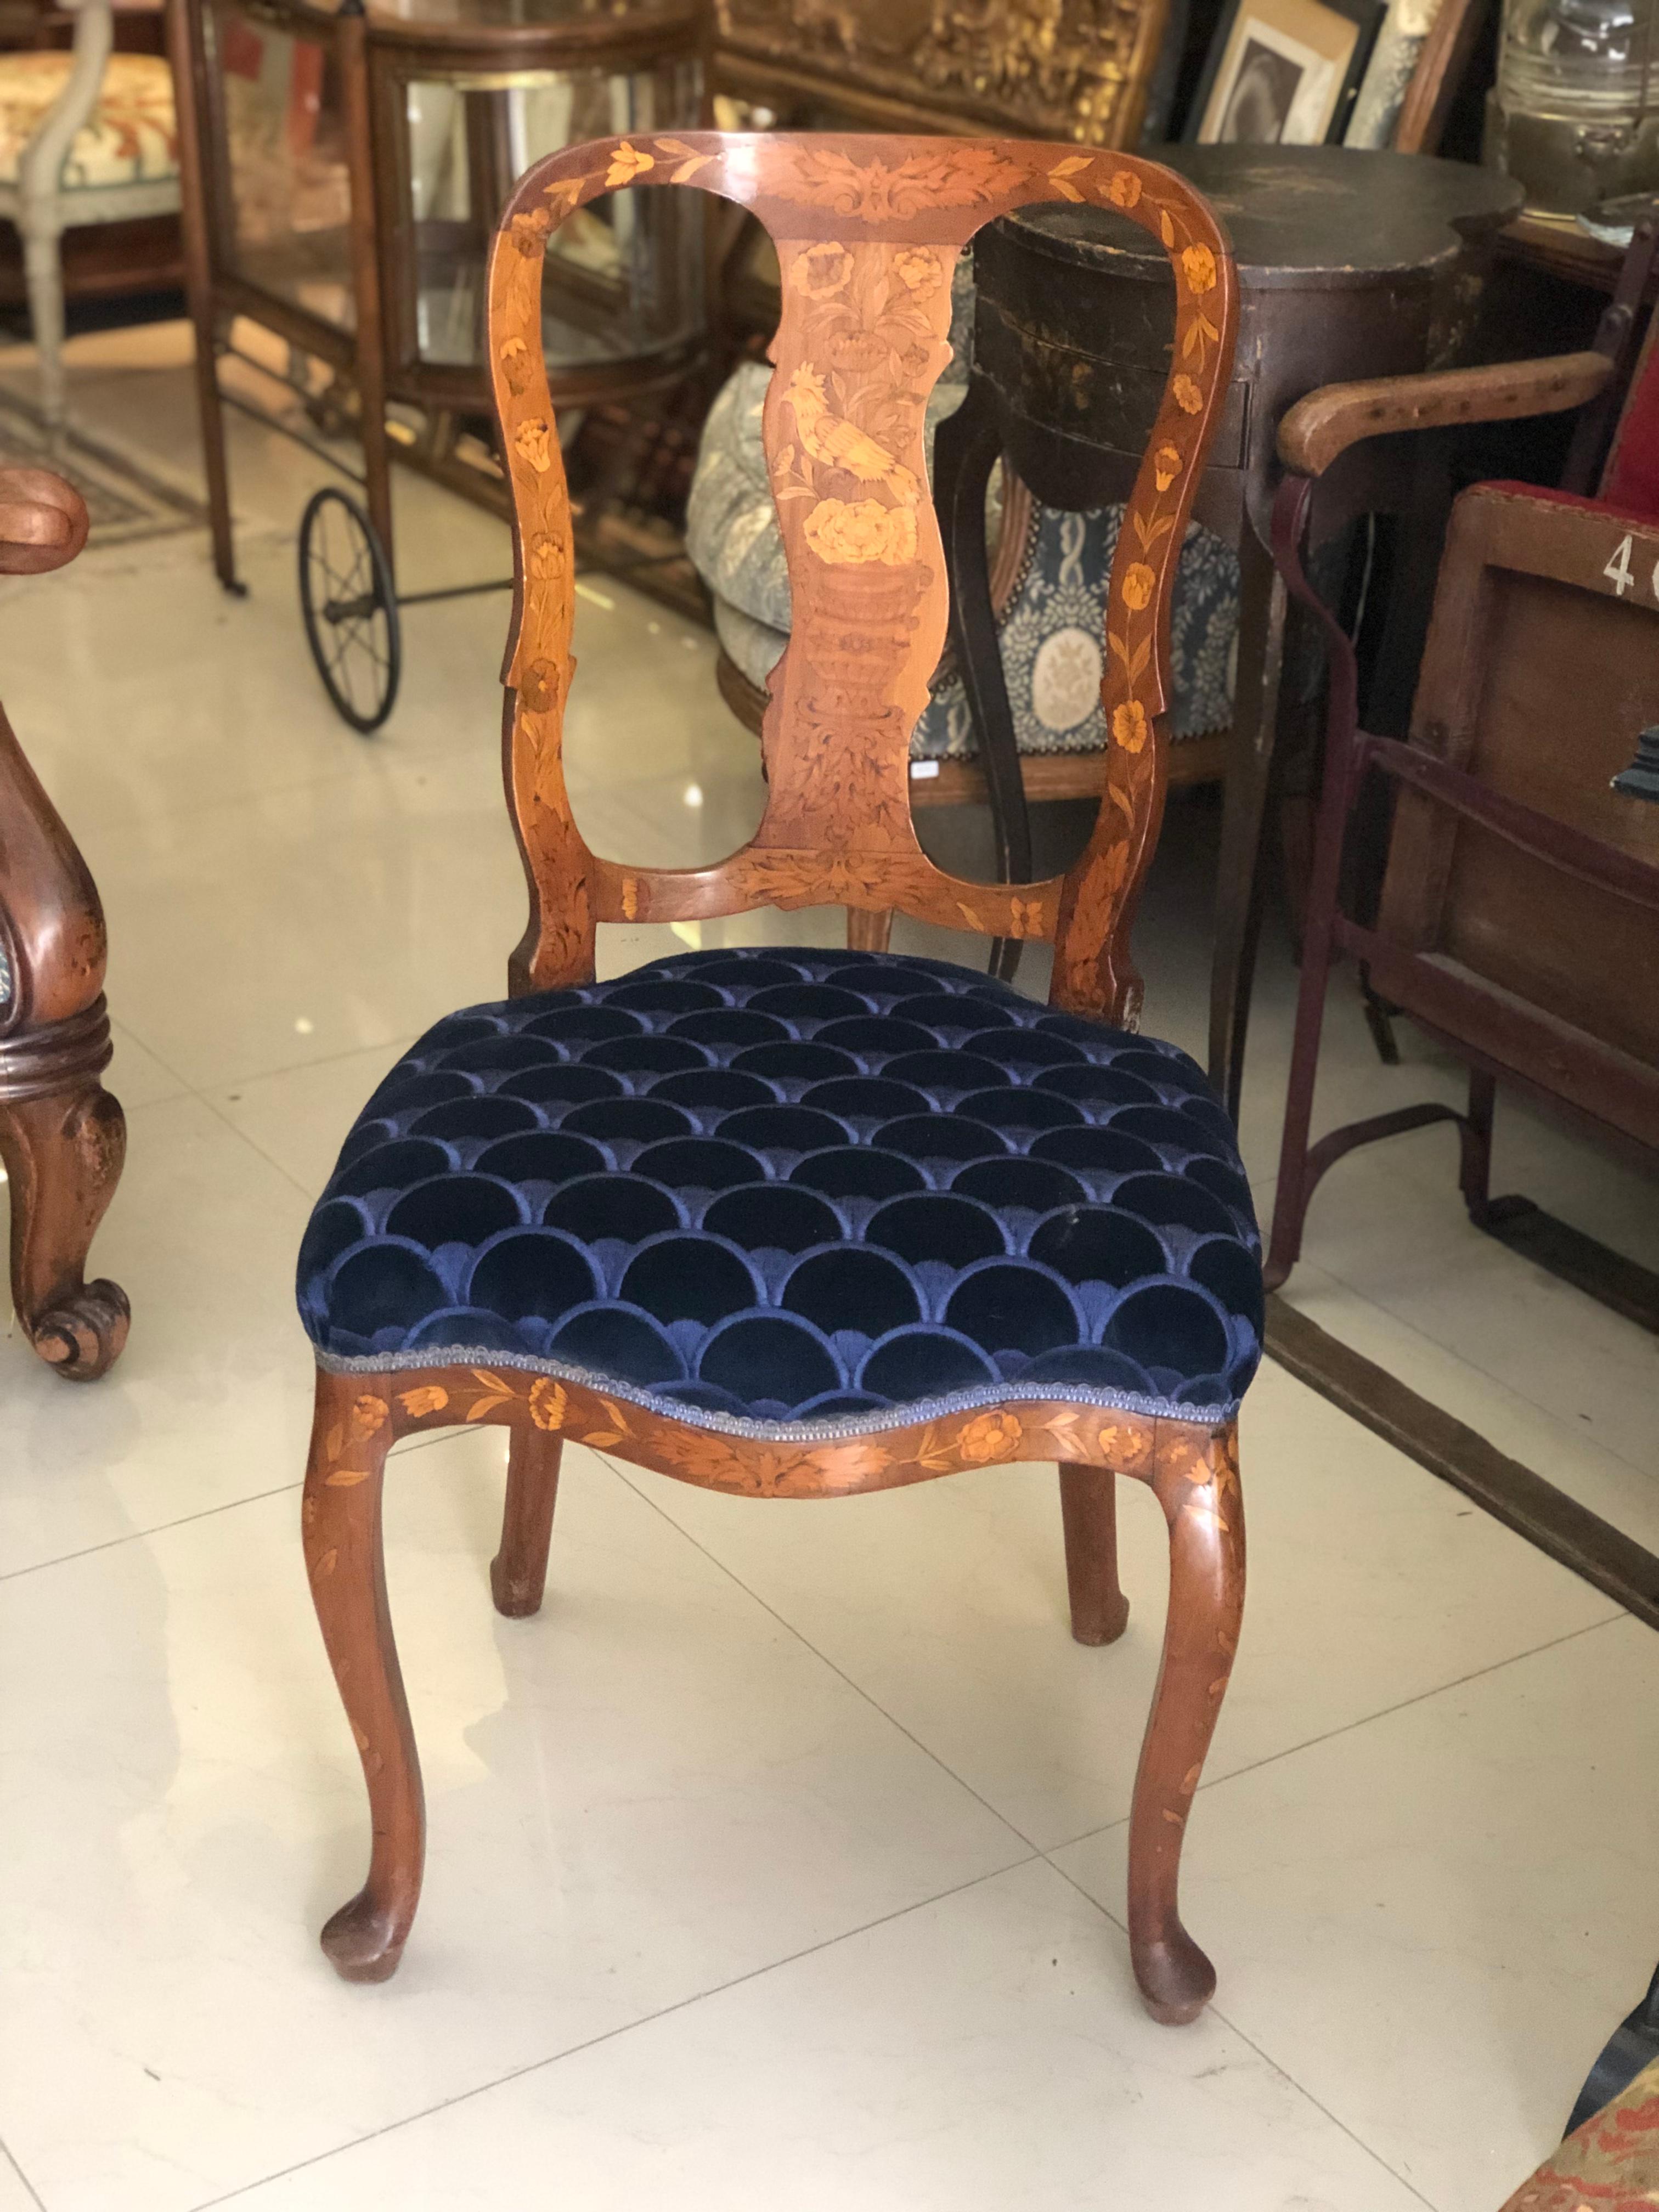 Pair of inlaid wood chairs with flower motifs, birds and vases
flowery, arched feet. Blue velvet trim with scales. Dutch work of the nineteenth century. Very good condition.